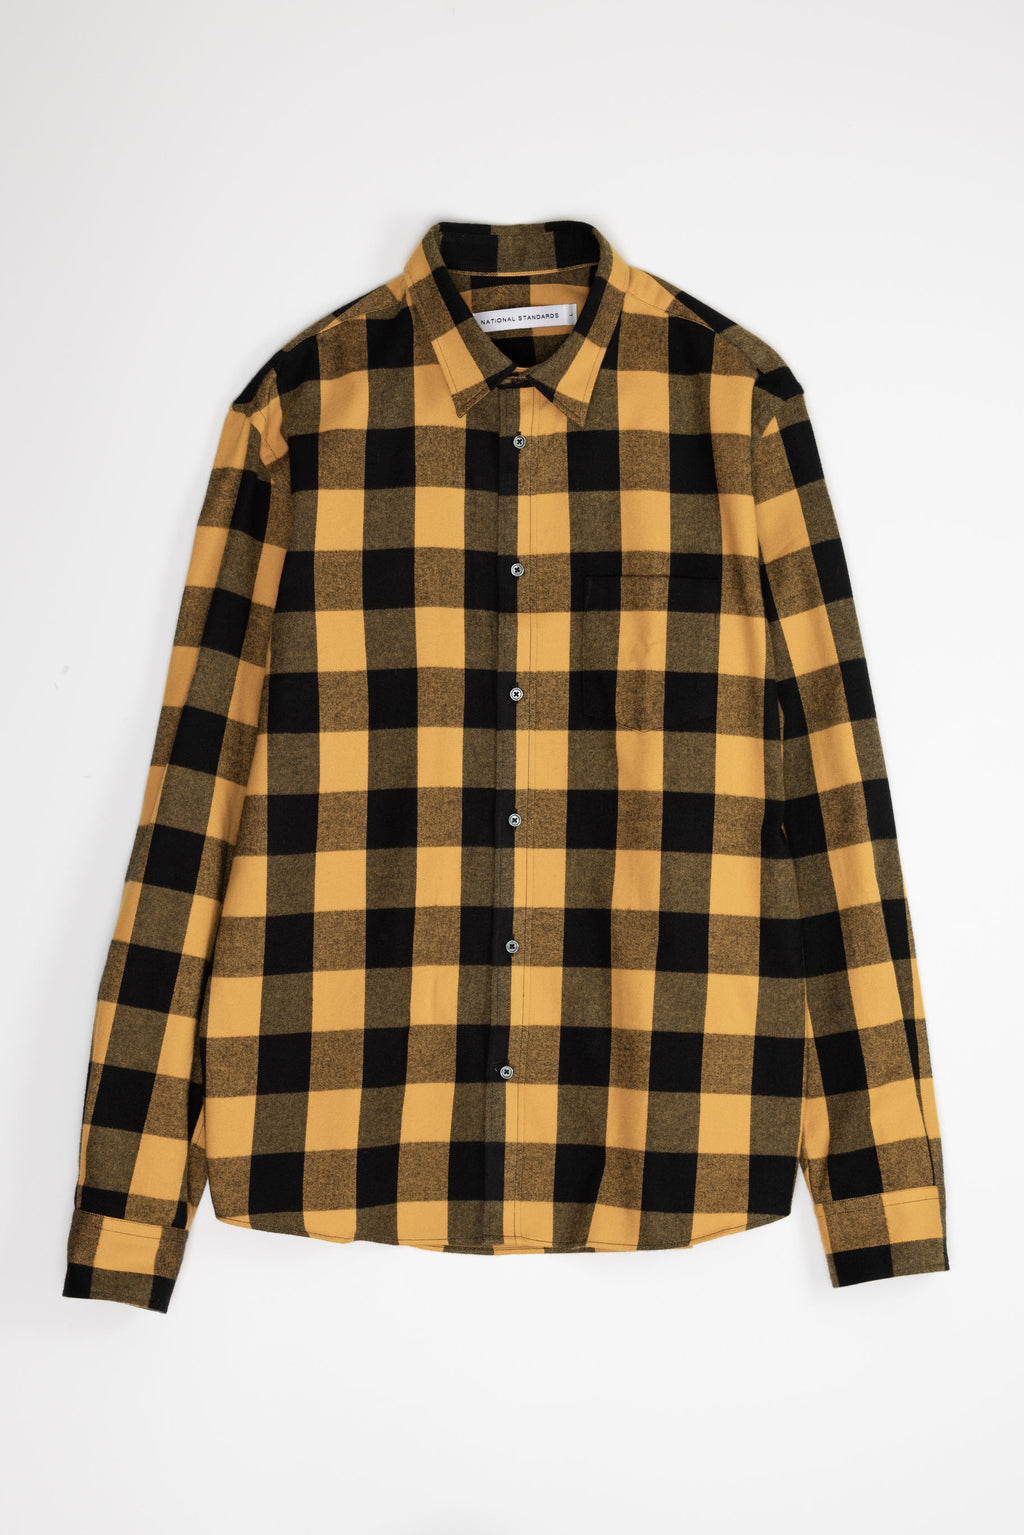 Japanese Brushed Buffalo Plaid in Yellow and Black 01